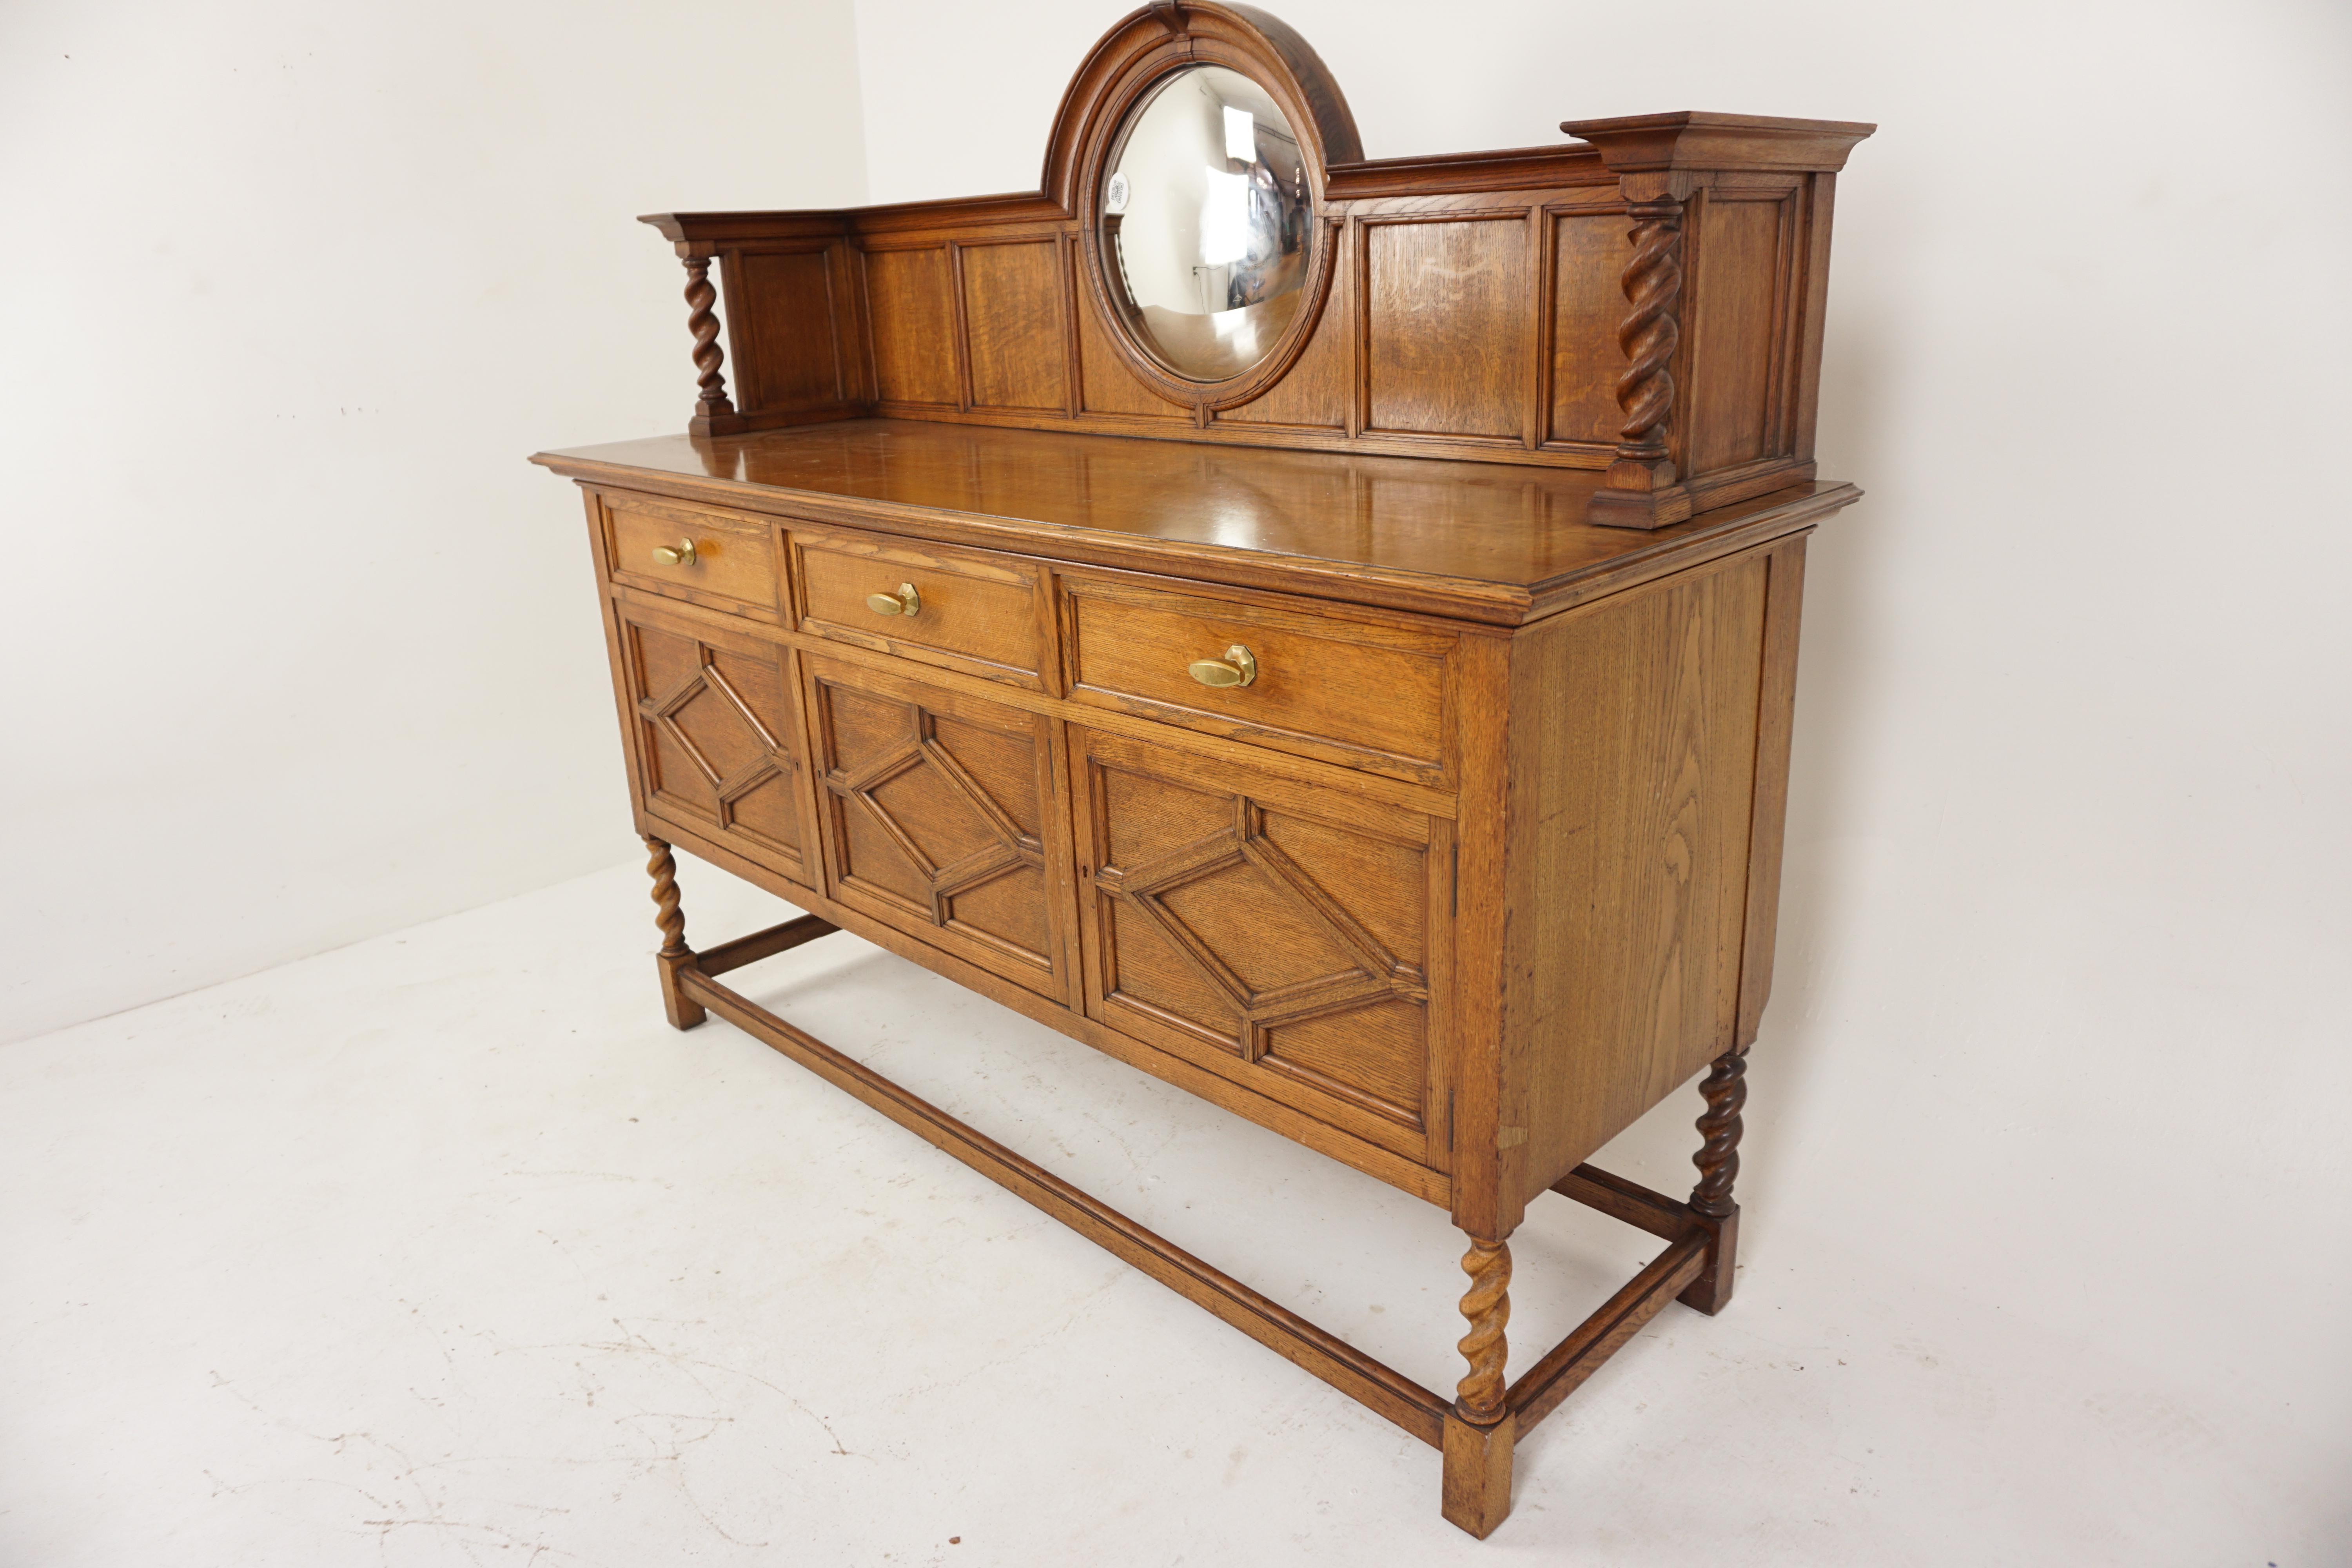 Antique tiger oak Barley Twist sideboard mirror back, Scotland 1910, H702

Scotland 1910
Solid Oak
Original Finish
High Back gallery with convex mirror
Sitting on a rectangular tiger oak top
Three dovetailed panelled drawers with original